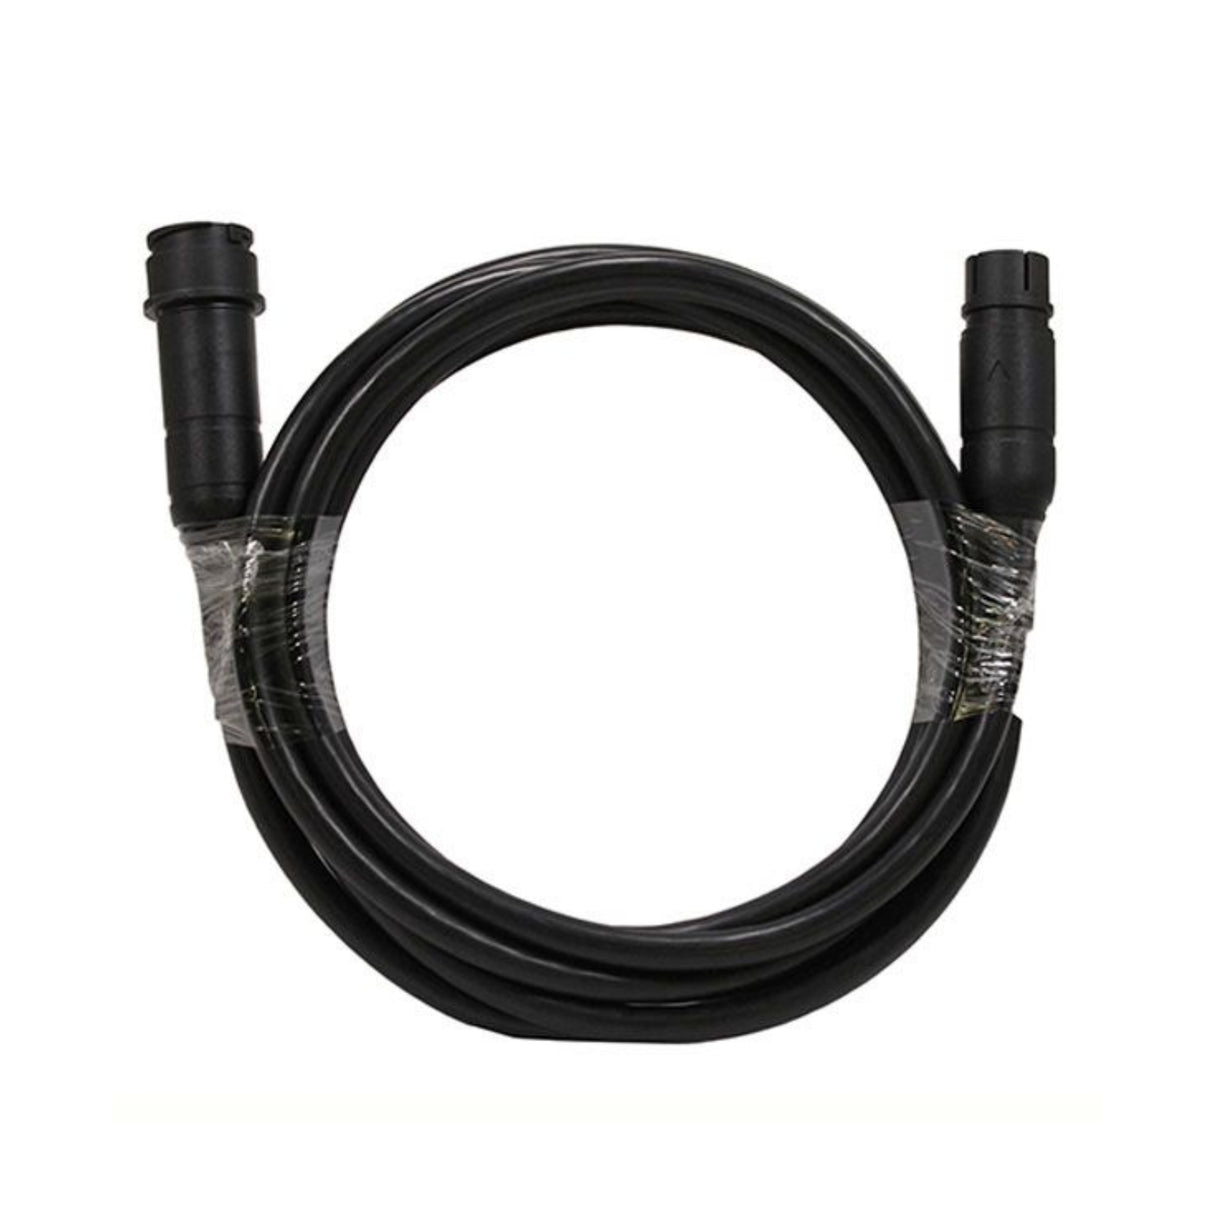 Raymarine RealVision 3D Transducer Extension Cable - 8m - PROTEUS MARINE STORE